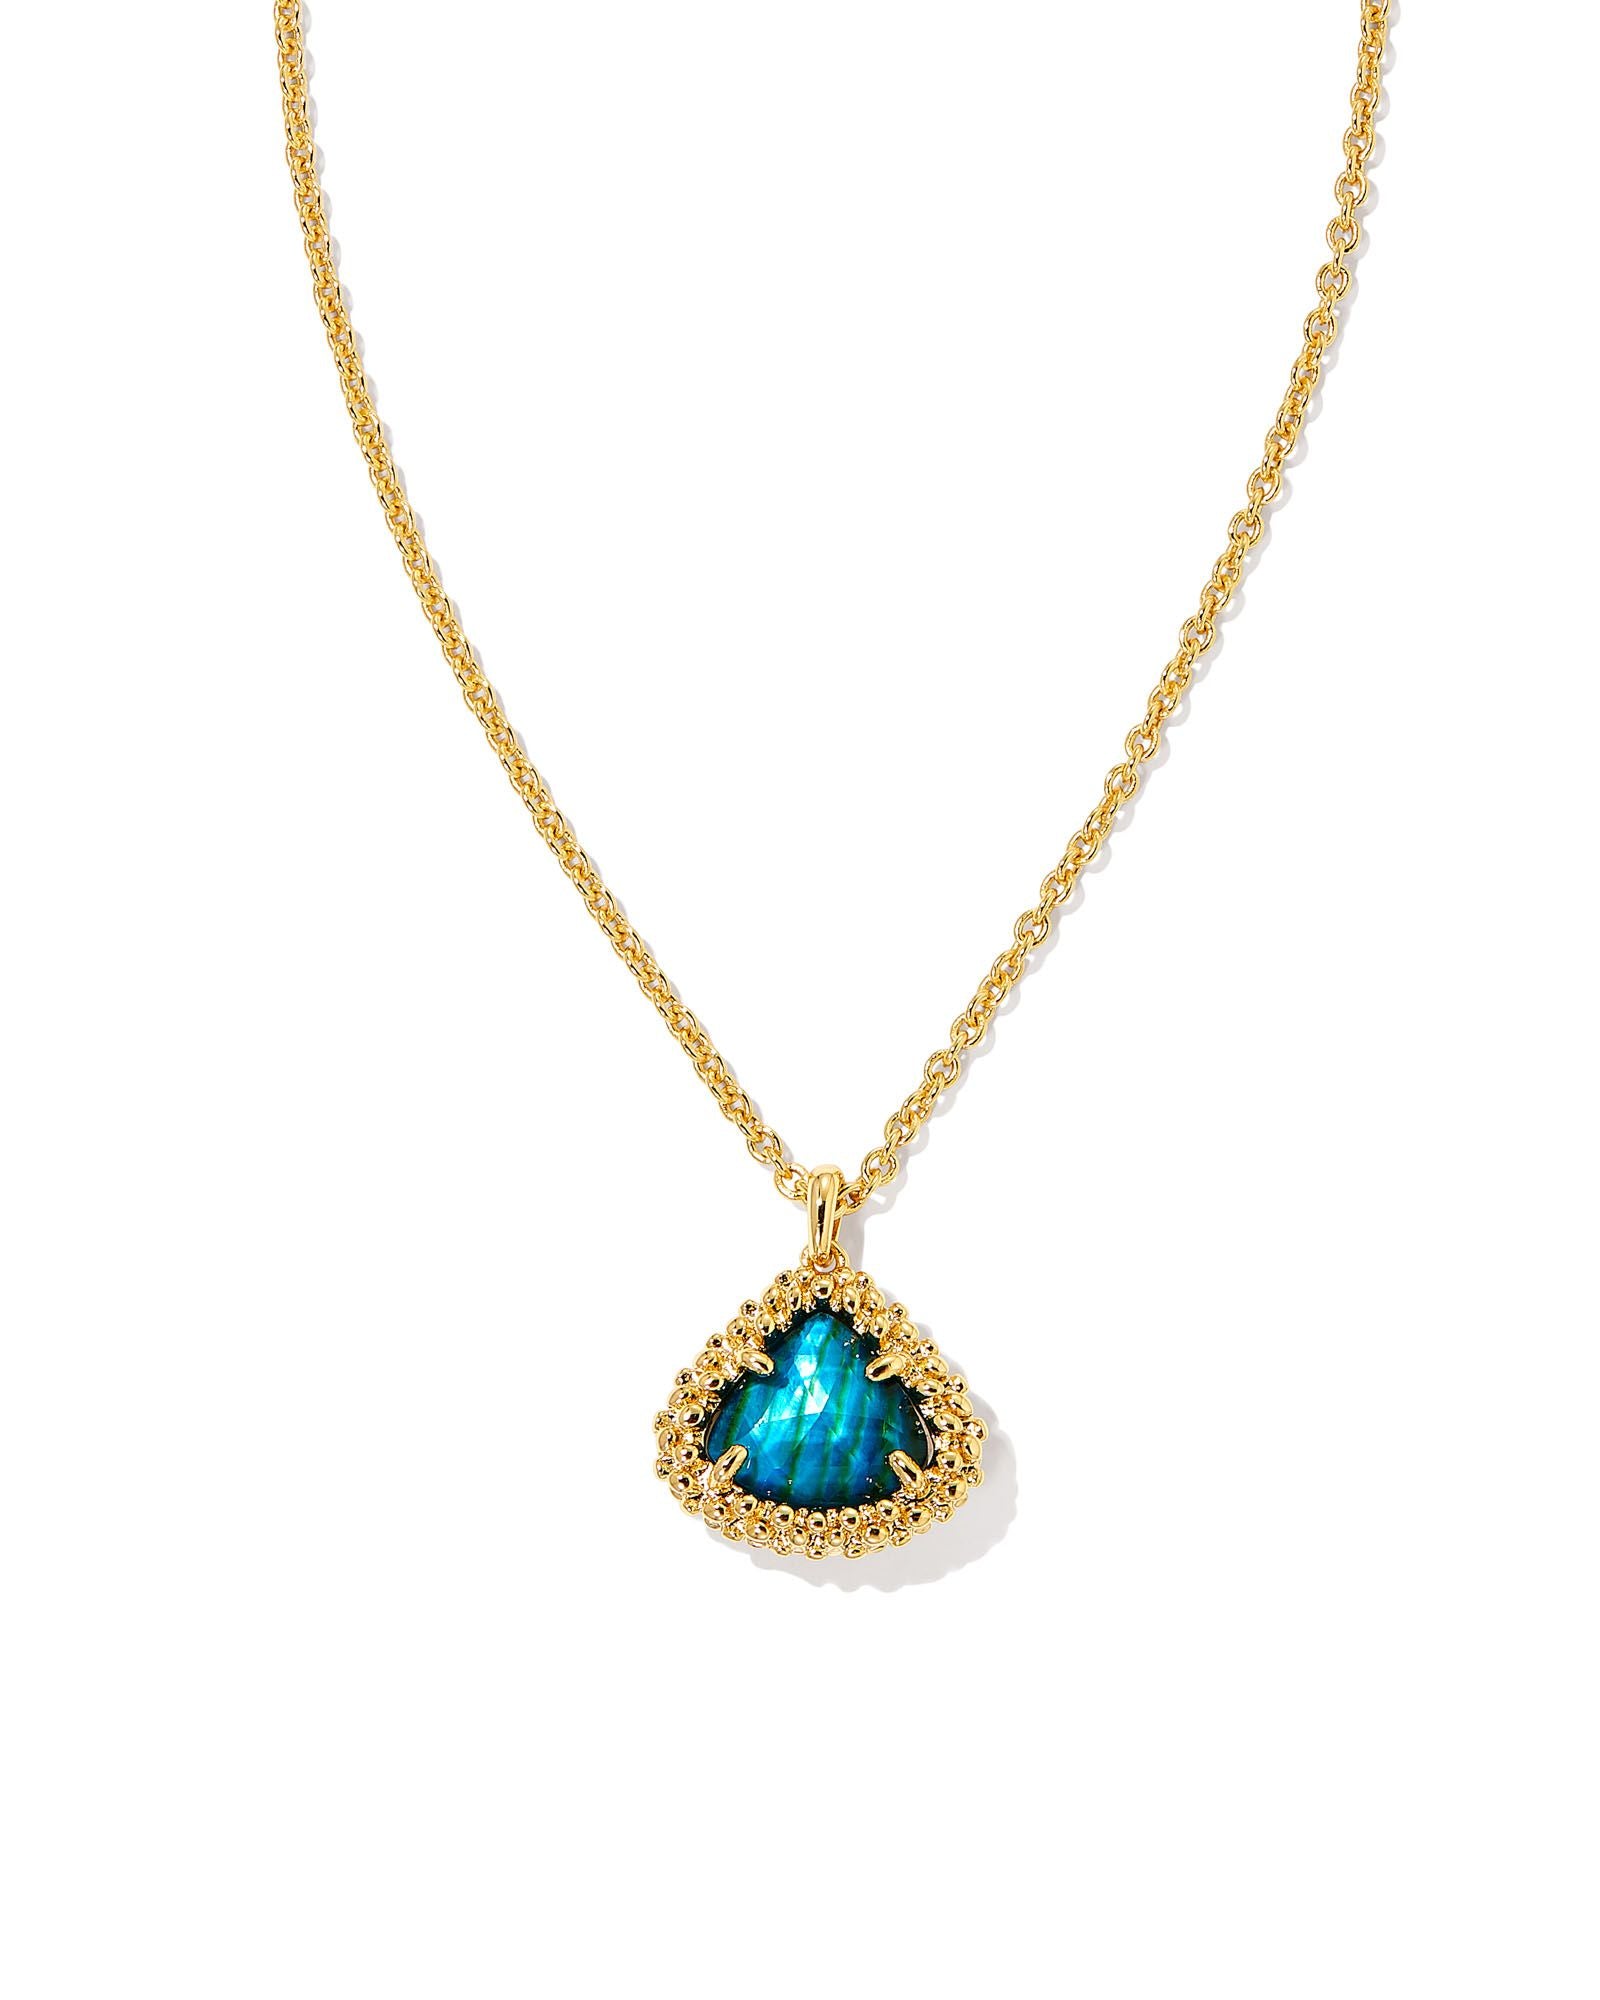 Framed Kendall Short Pendant Necklace in Gold Teal Abalone